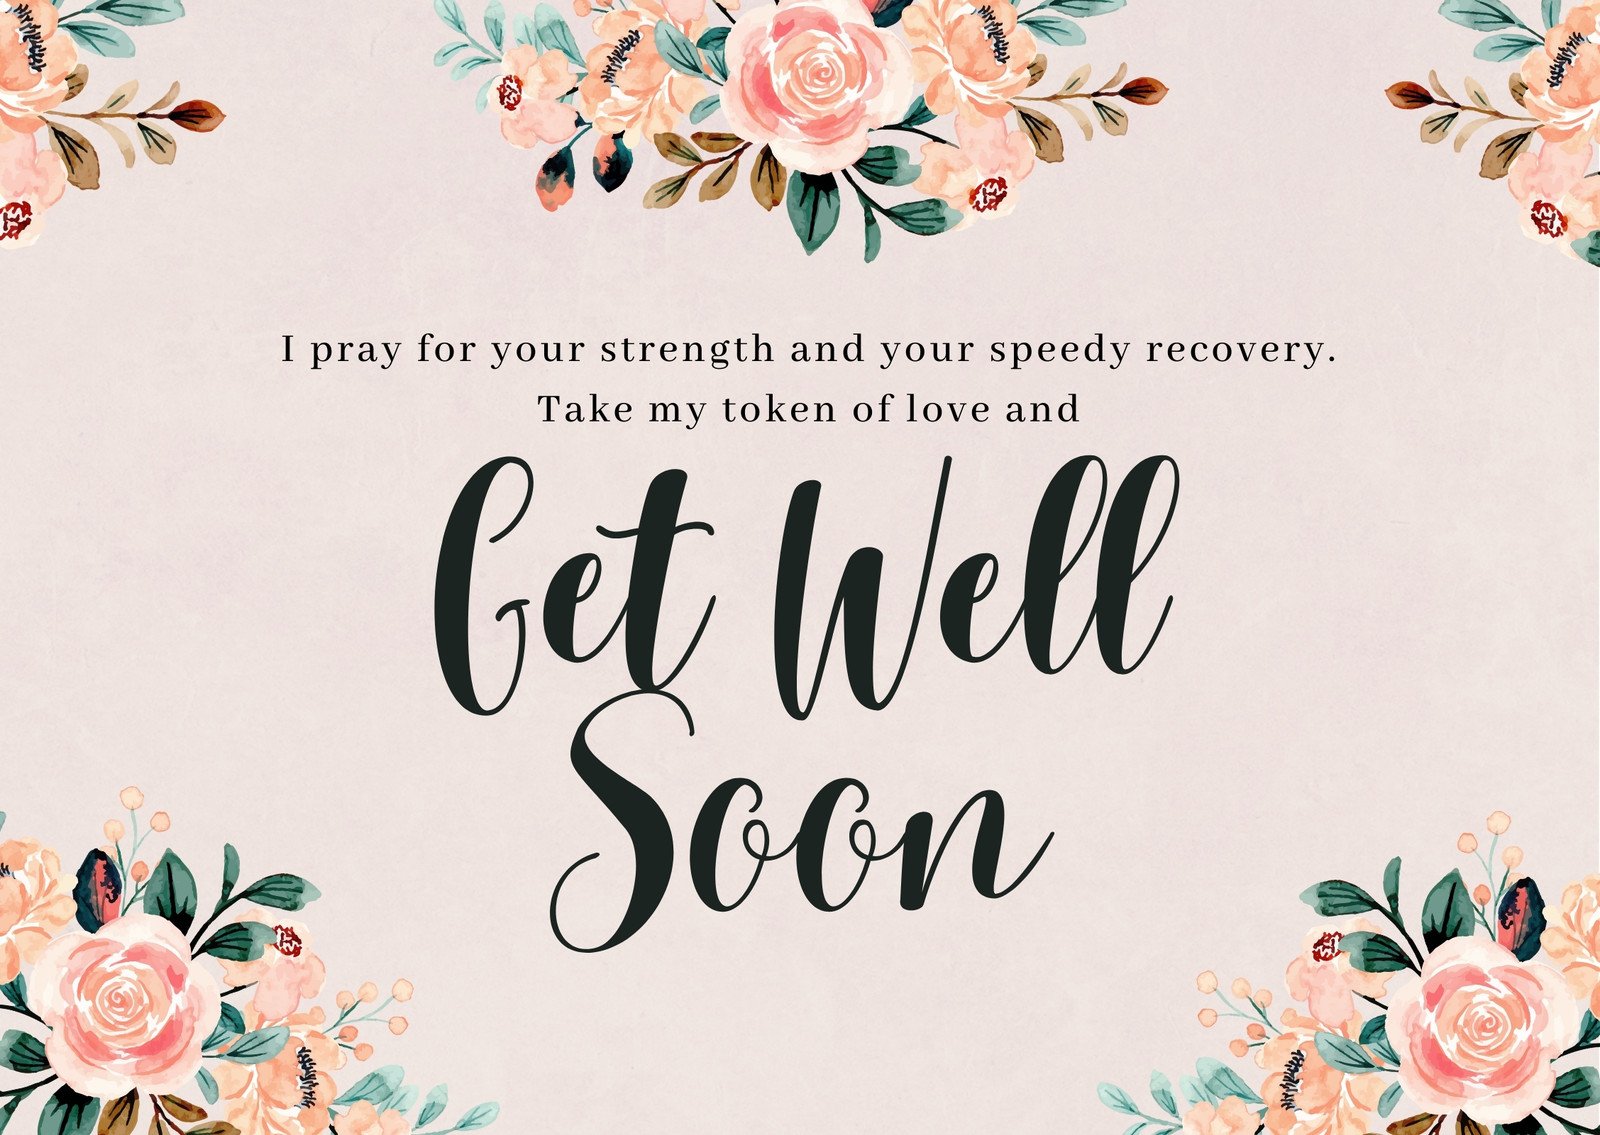 Ultimate Collection of 999  Prayer Get Well Soon Images Stunning